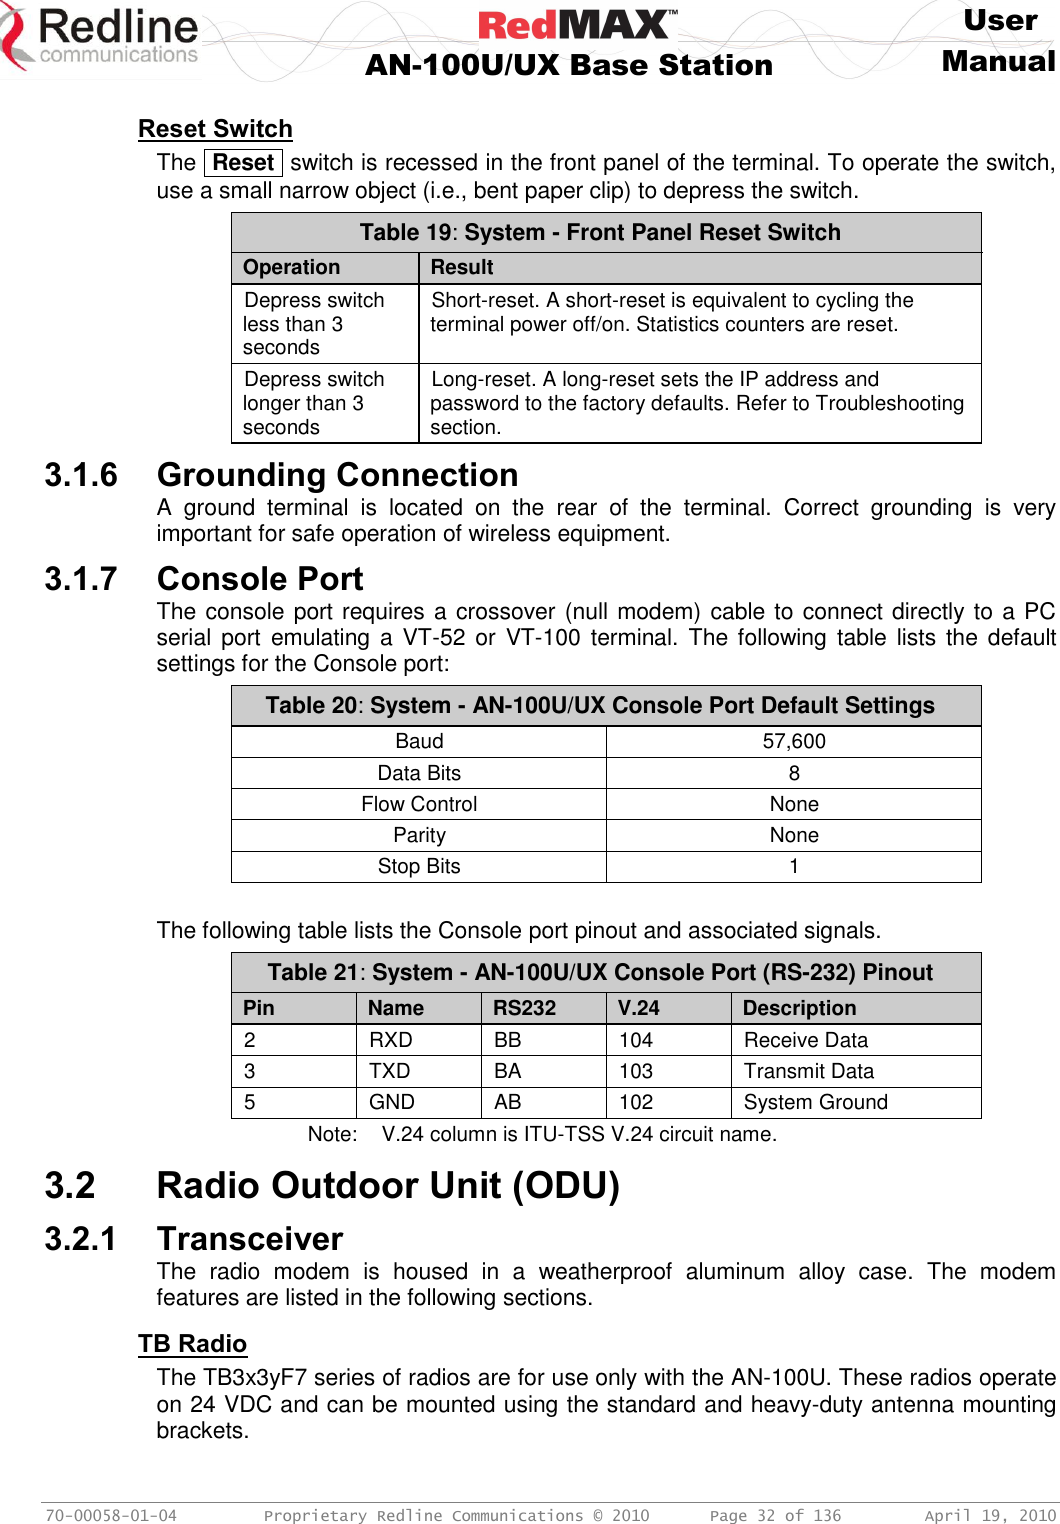     User  AN-100U/UX Base Station Manual   70-00058-01-04  Proprietary Redline Communications © 2010   Page 32 of 136  April 19, 2010  Reset Switch The  Reset  switch is recessed in the front panel of the terminal. To operate the switch, use a small narrow object (i.e., bent paper clip) to depress the switch. Table 19: System - Front Panel Reset Switch Operation Result Depress switch less than 3 seconds Short-reset. A short-reset is equivalent to cycling the terminal power off/on. Statistics counters are reset.  Depress switch longer than 3 seconds Long-reset. A long-reset sets the IP address and password to the factory defaults. Refer to Troubleshooting section. 3.1.6 Grounding Connection A  ground  terminal  is  located  on  the  rear  of  the  terminal.  Correct  grounding  is  very important for safe operation of wireless equipment. 3.1.7 Console Port The console port requires a crossover (null modem) cable to connect directly to a PC serial port  emulating a  VT-52 or  VT-100 terminal. The following table  lists the  default settings for the Console port: Table 20: System - AN-100U/UX Console Port Default Settings Baud 57,600 Data Bits 8 Flow Control None Parity None Stop Bits 1  The following table lists the Console port pinout and associated signals. Table 21: System - AN-100U/UX Console Port (RS-232) Pinout Pin Name RS232 V.24 Description 2 RXD BB 104 Receive Data 3 TXD BA 103 Transmit Data 5 GND  AB 102 System Ground Note:  V.24 column is ITU-TSS V.24 circuit name.  3.2 Radio Outdoor Unit (ODU) 3.2.1 Transceiver The  radio  modem  is  housed  in  a  weatherproof  aluminum  alloy  case.  The  modem features are listed in the following sections.  TB Radio The TB3x3yF7 series of radios are for use only with the AN-100U. These radios operate on 24 VDC and can be mounted using the standard and heavy-duty antenna mounting brackets. 